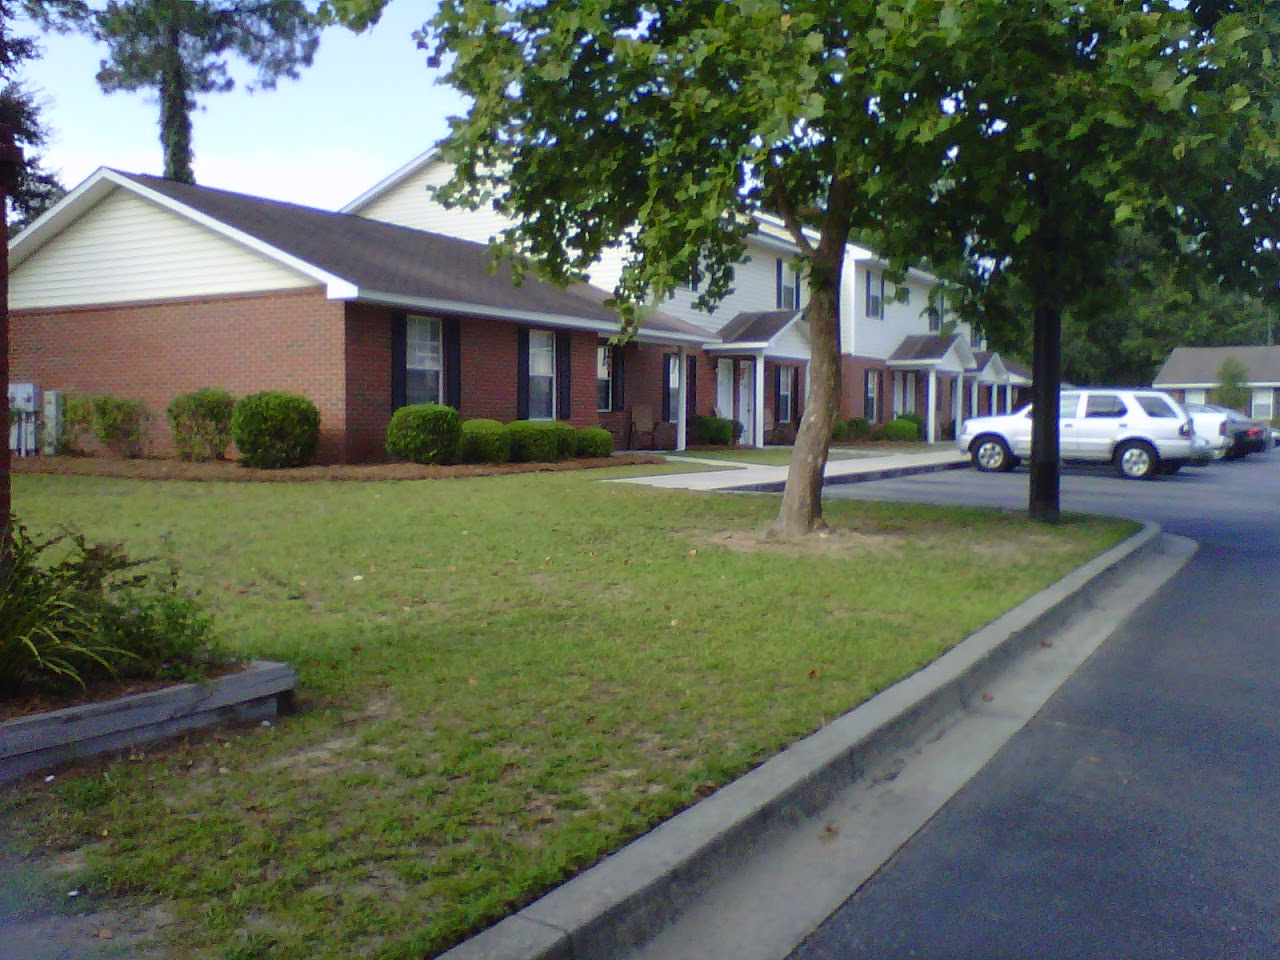 Photo of ARBOR TRACE PHASE I. Affordable housing located at 4700 ROLLING PINE DR LAKE PARK, GA 31636